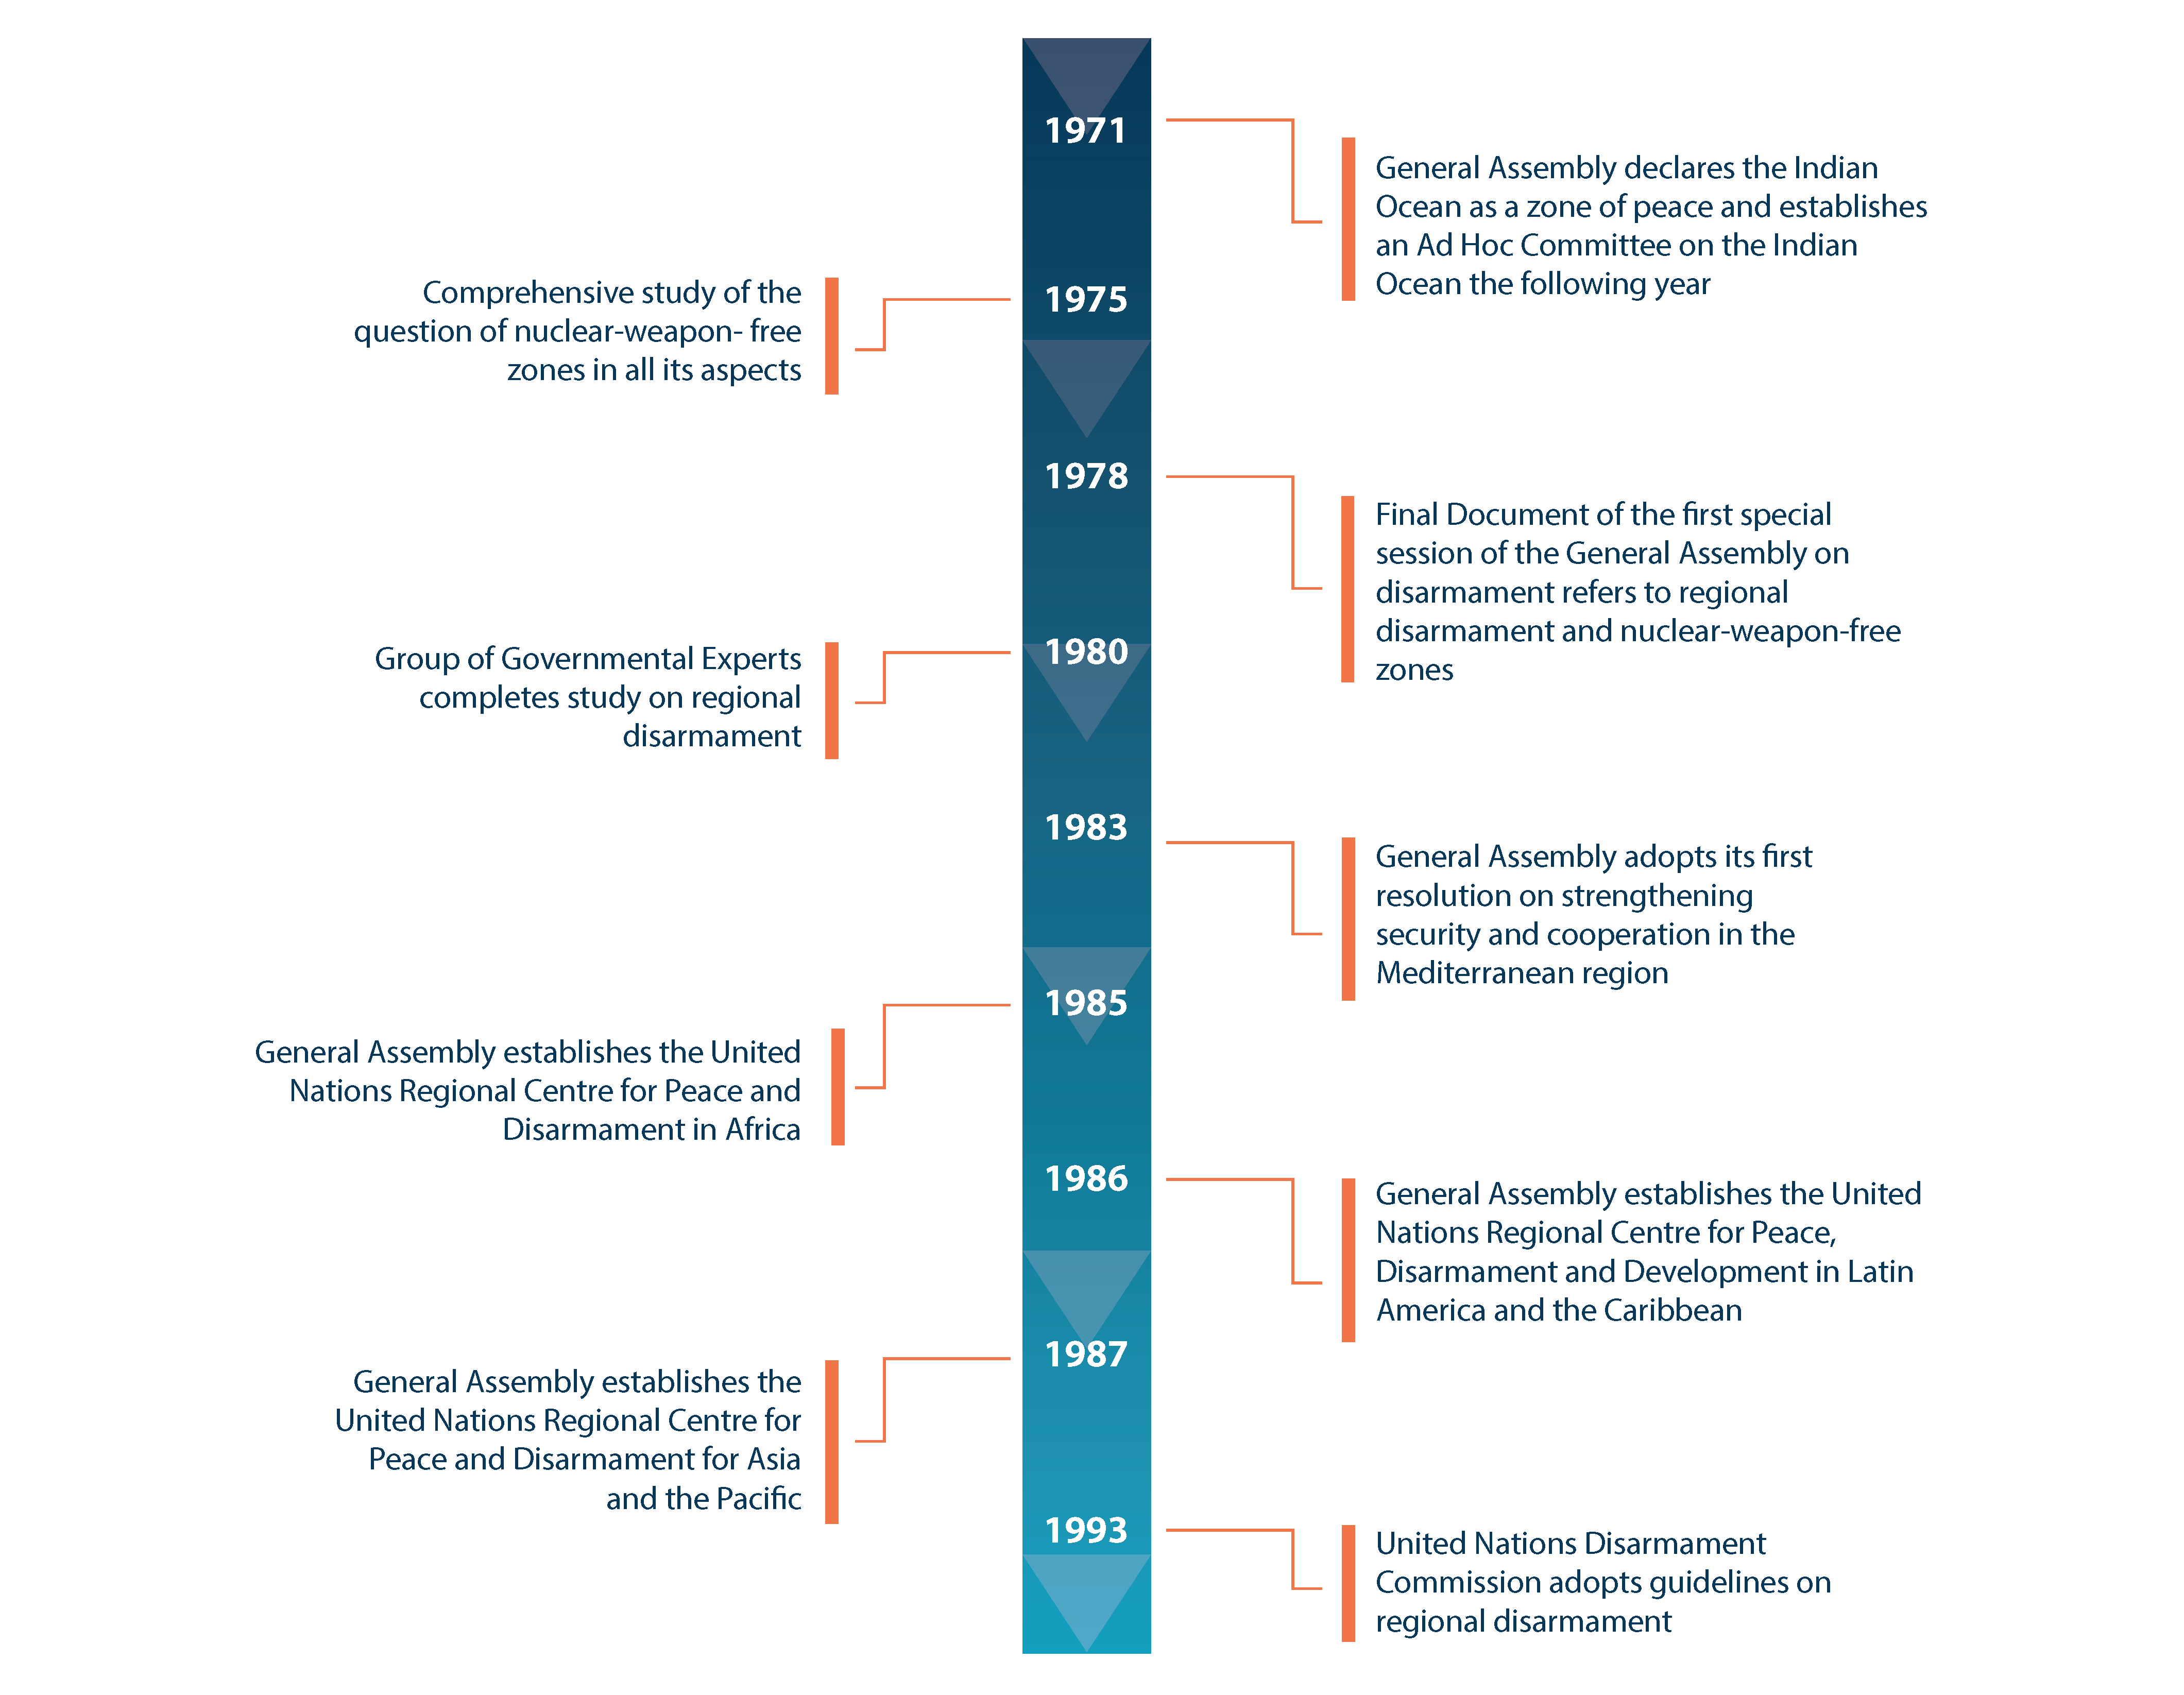 Timeline of highlights from 1971 to 1993